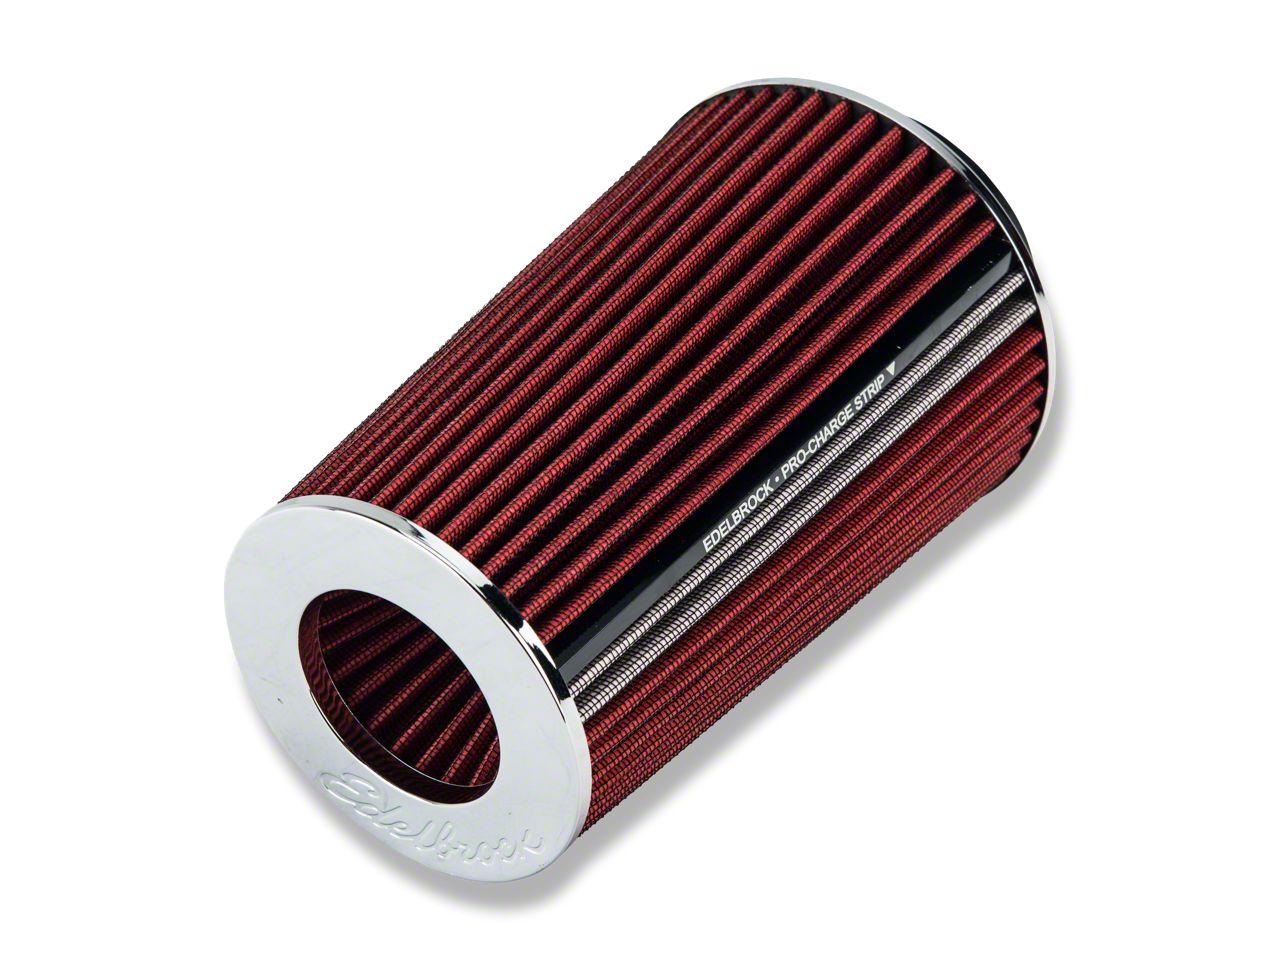 Air, Oil & Fuel Filters